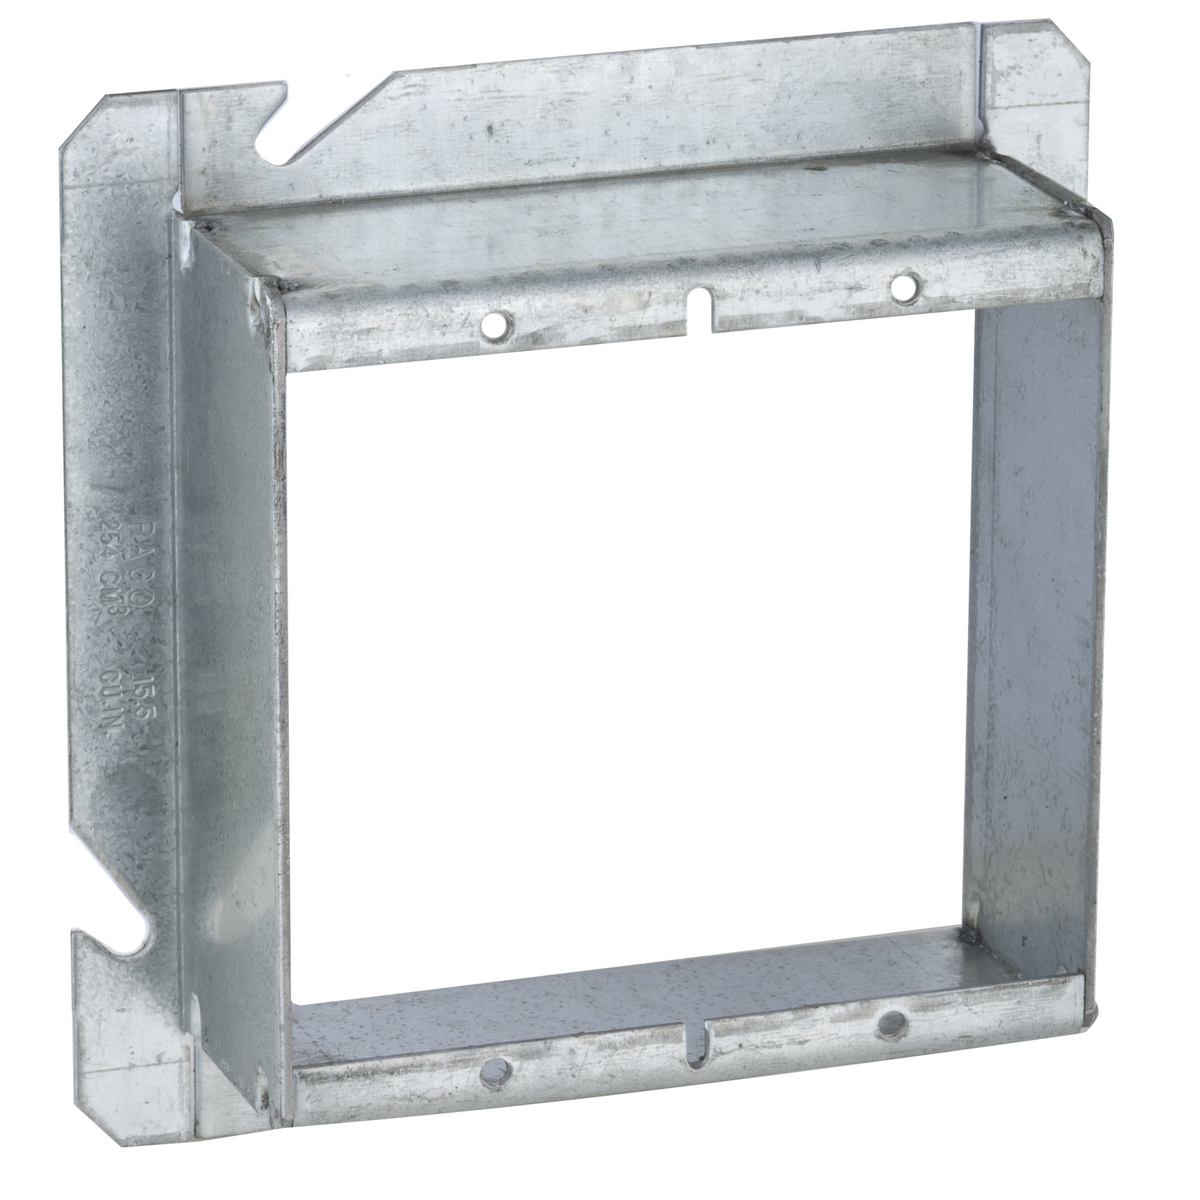 RACO 885 4-11/16" SQUARE MUD-RING, TWO DEVICE, RAISED 1-1/2 IN